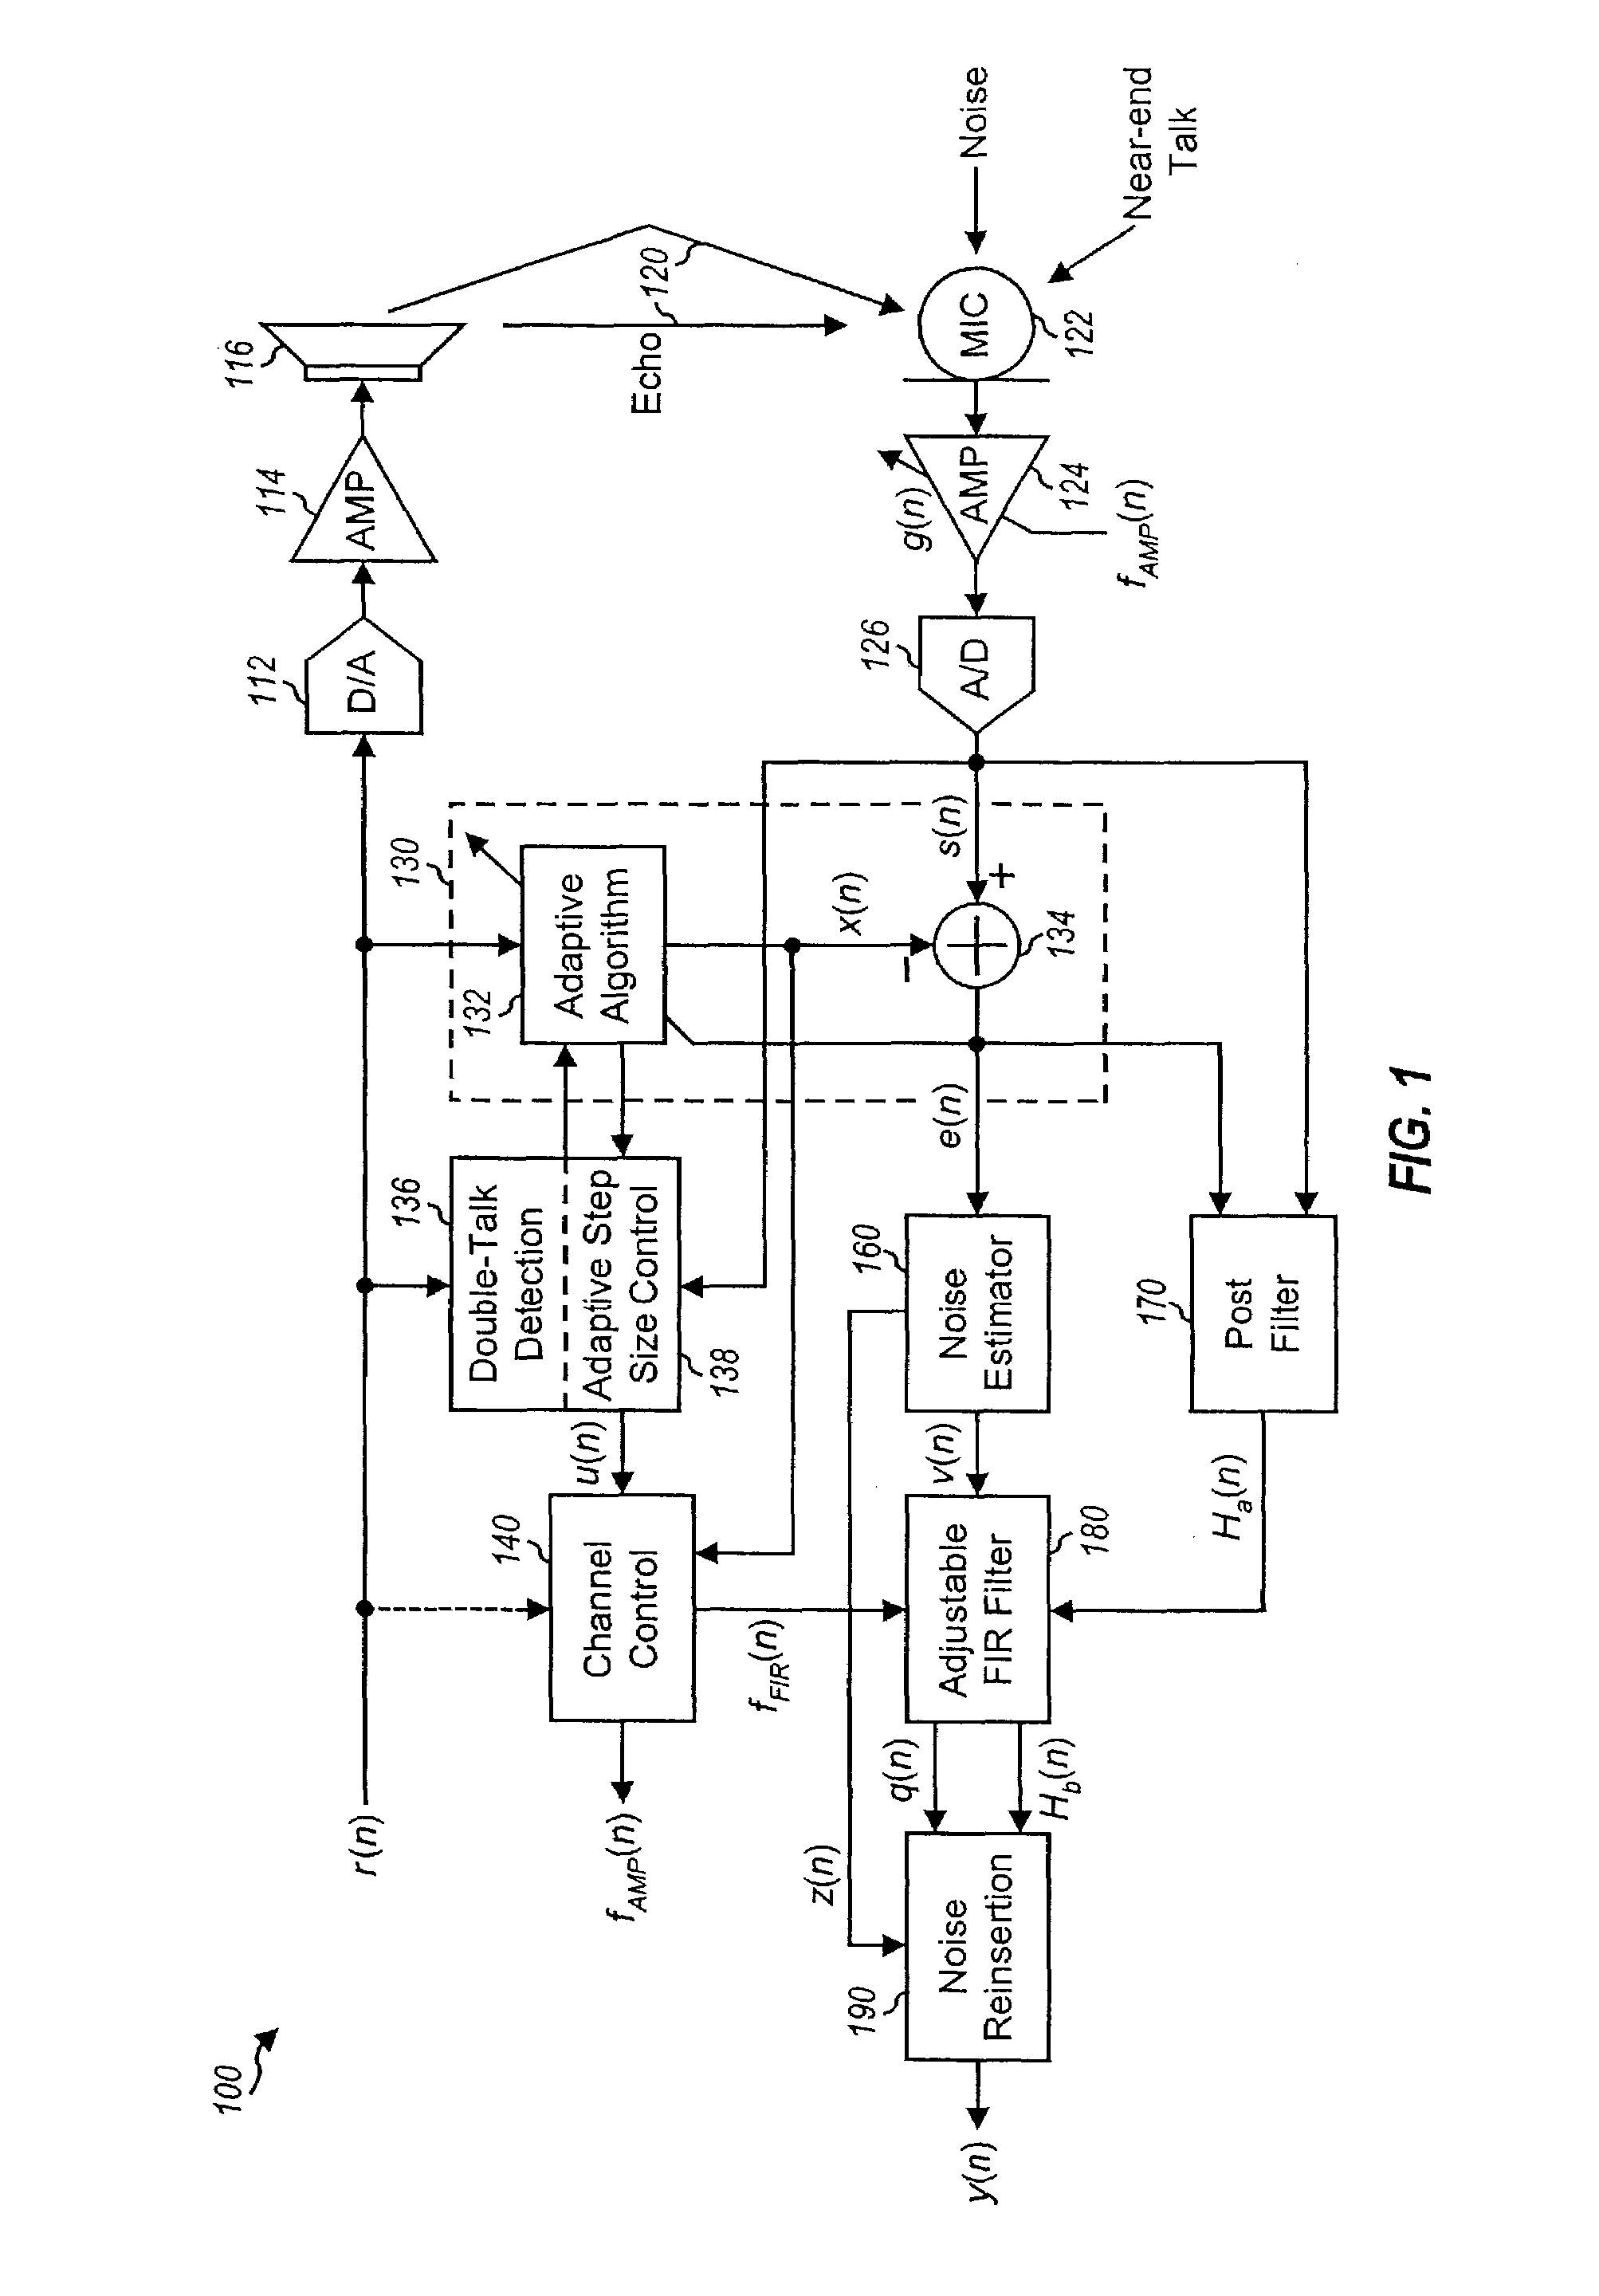 Method and system for nonlinear echo suppression